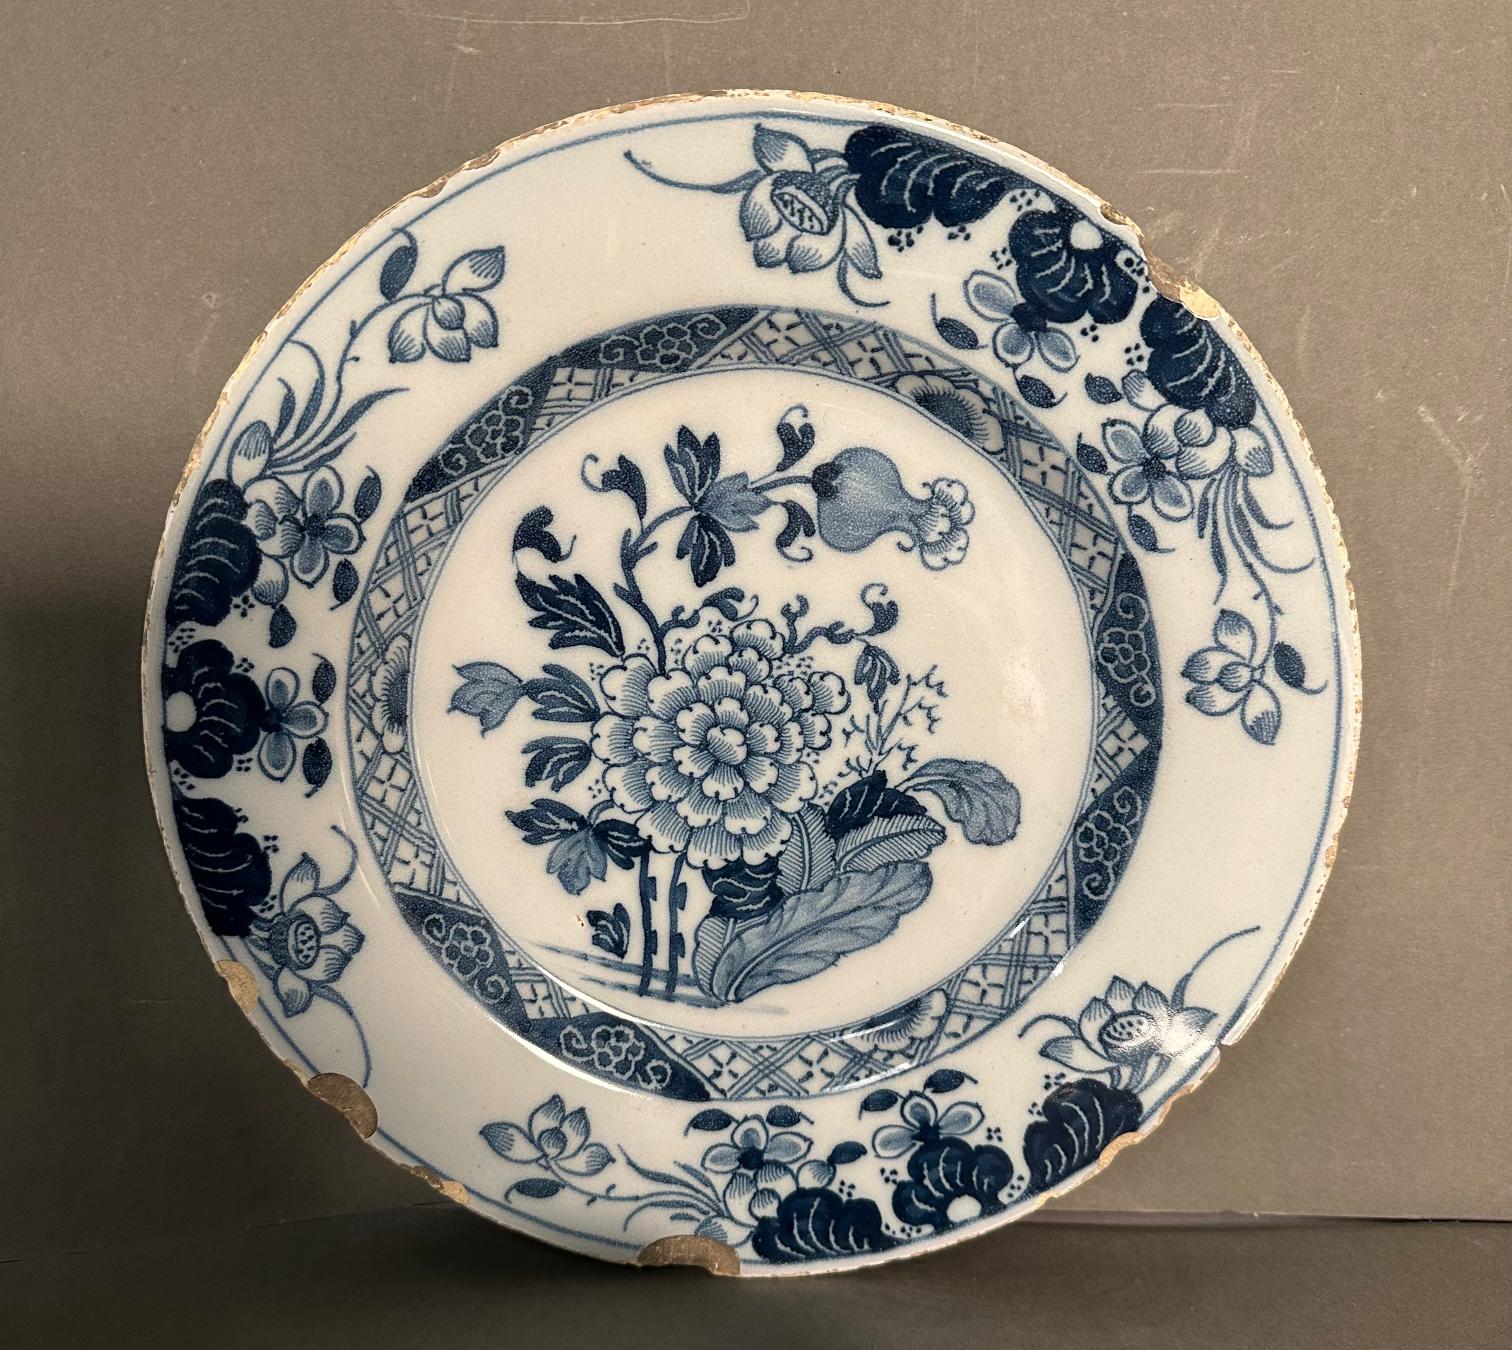 A selection of Chinese blue and white ceramic to include a plate, side plates and a small bowl - Image 9 of 12